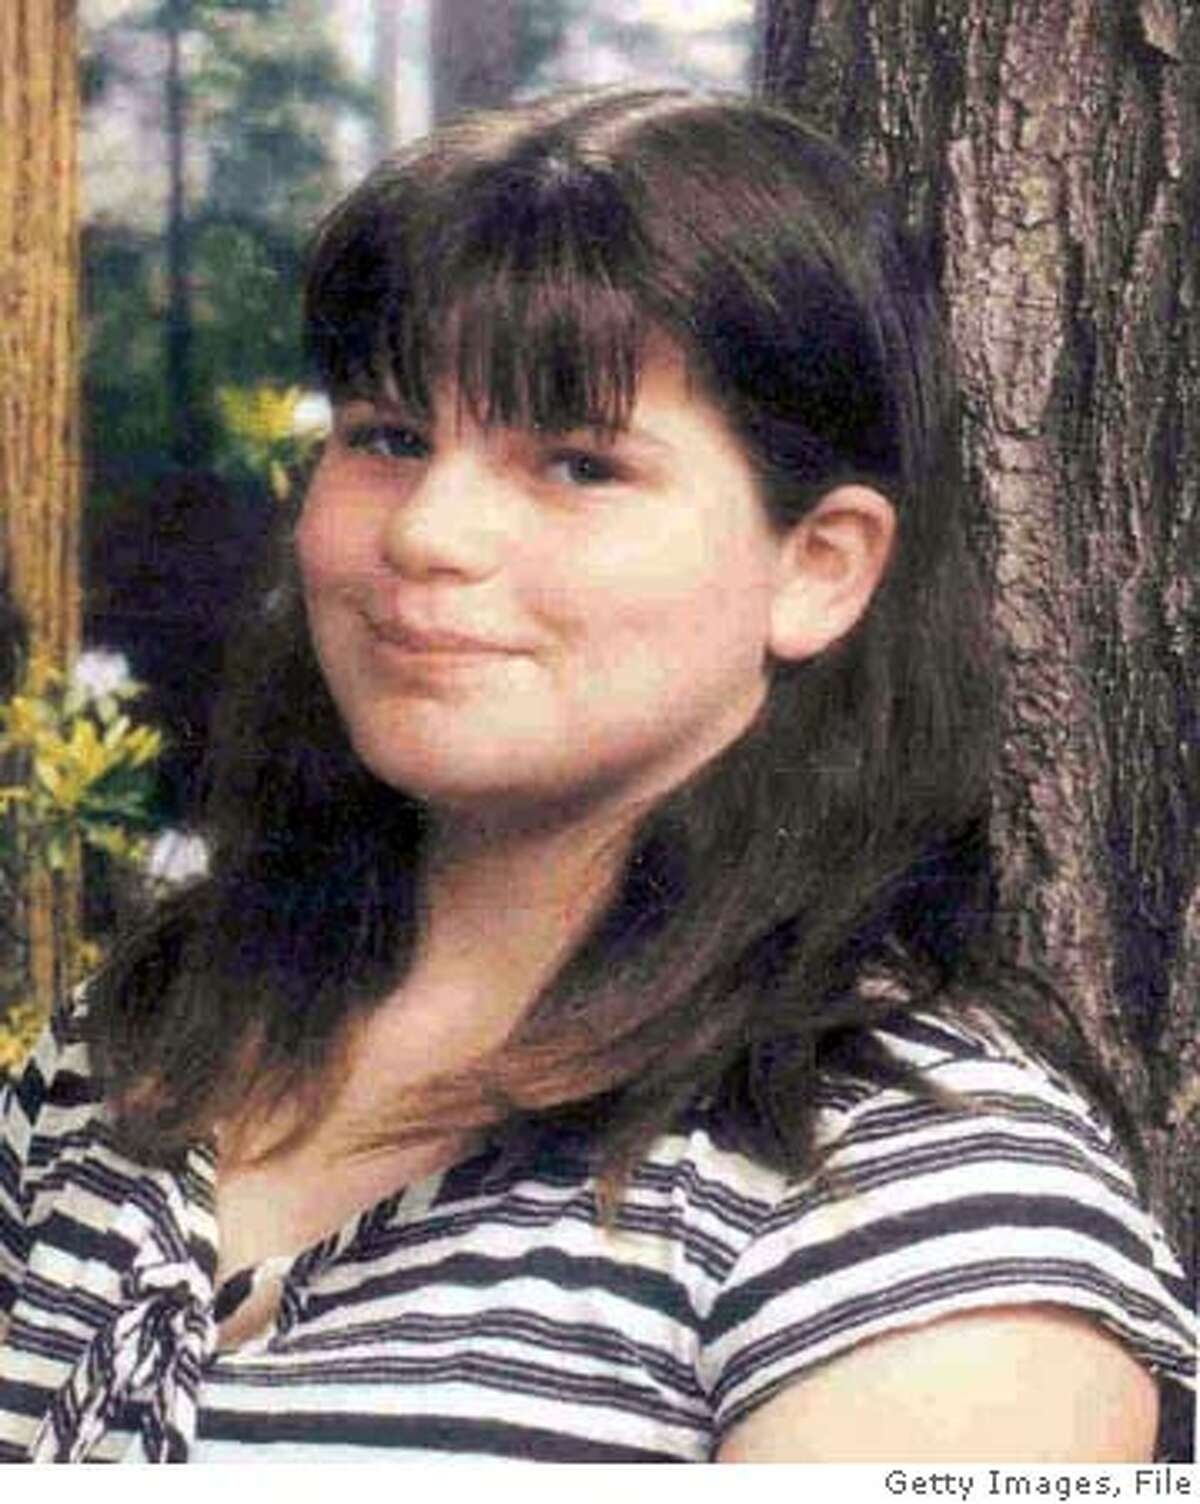 UNDATED: (FILE PHOTO) In this photo released by the Hillsborough County Sheriffs Dept., thirteen-year-old Sarah Michelle Lunde is seen. It has been reported that a Missing Child Alert has been issued for Lunde, who has been missing since April 9, 2005 from Ruskin, Florida. Police have charged David Onstott with the murder of Sarah Lunde on April 17, 2005. The body of Lunde was found partially submerged in an abandoned fish pond about a half mile from her home on April 16, 2005 in Ruskin, Florida. (Photo by Hillsborough County Sheriffs Dept. via Getty Images) (FILE PHOTO) Getty Images provides access to this publicly distributed image for editorial purposes and is not the copyright owner. Additional permissions may be required and are the sole responsibility of the end user.